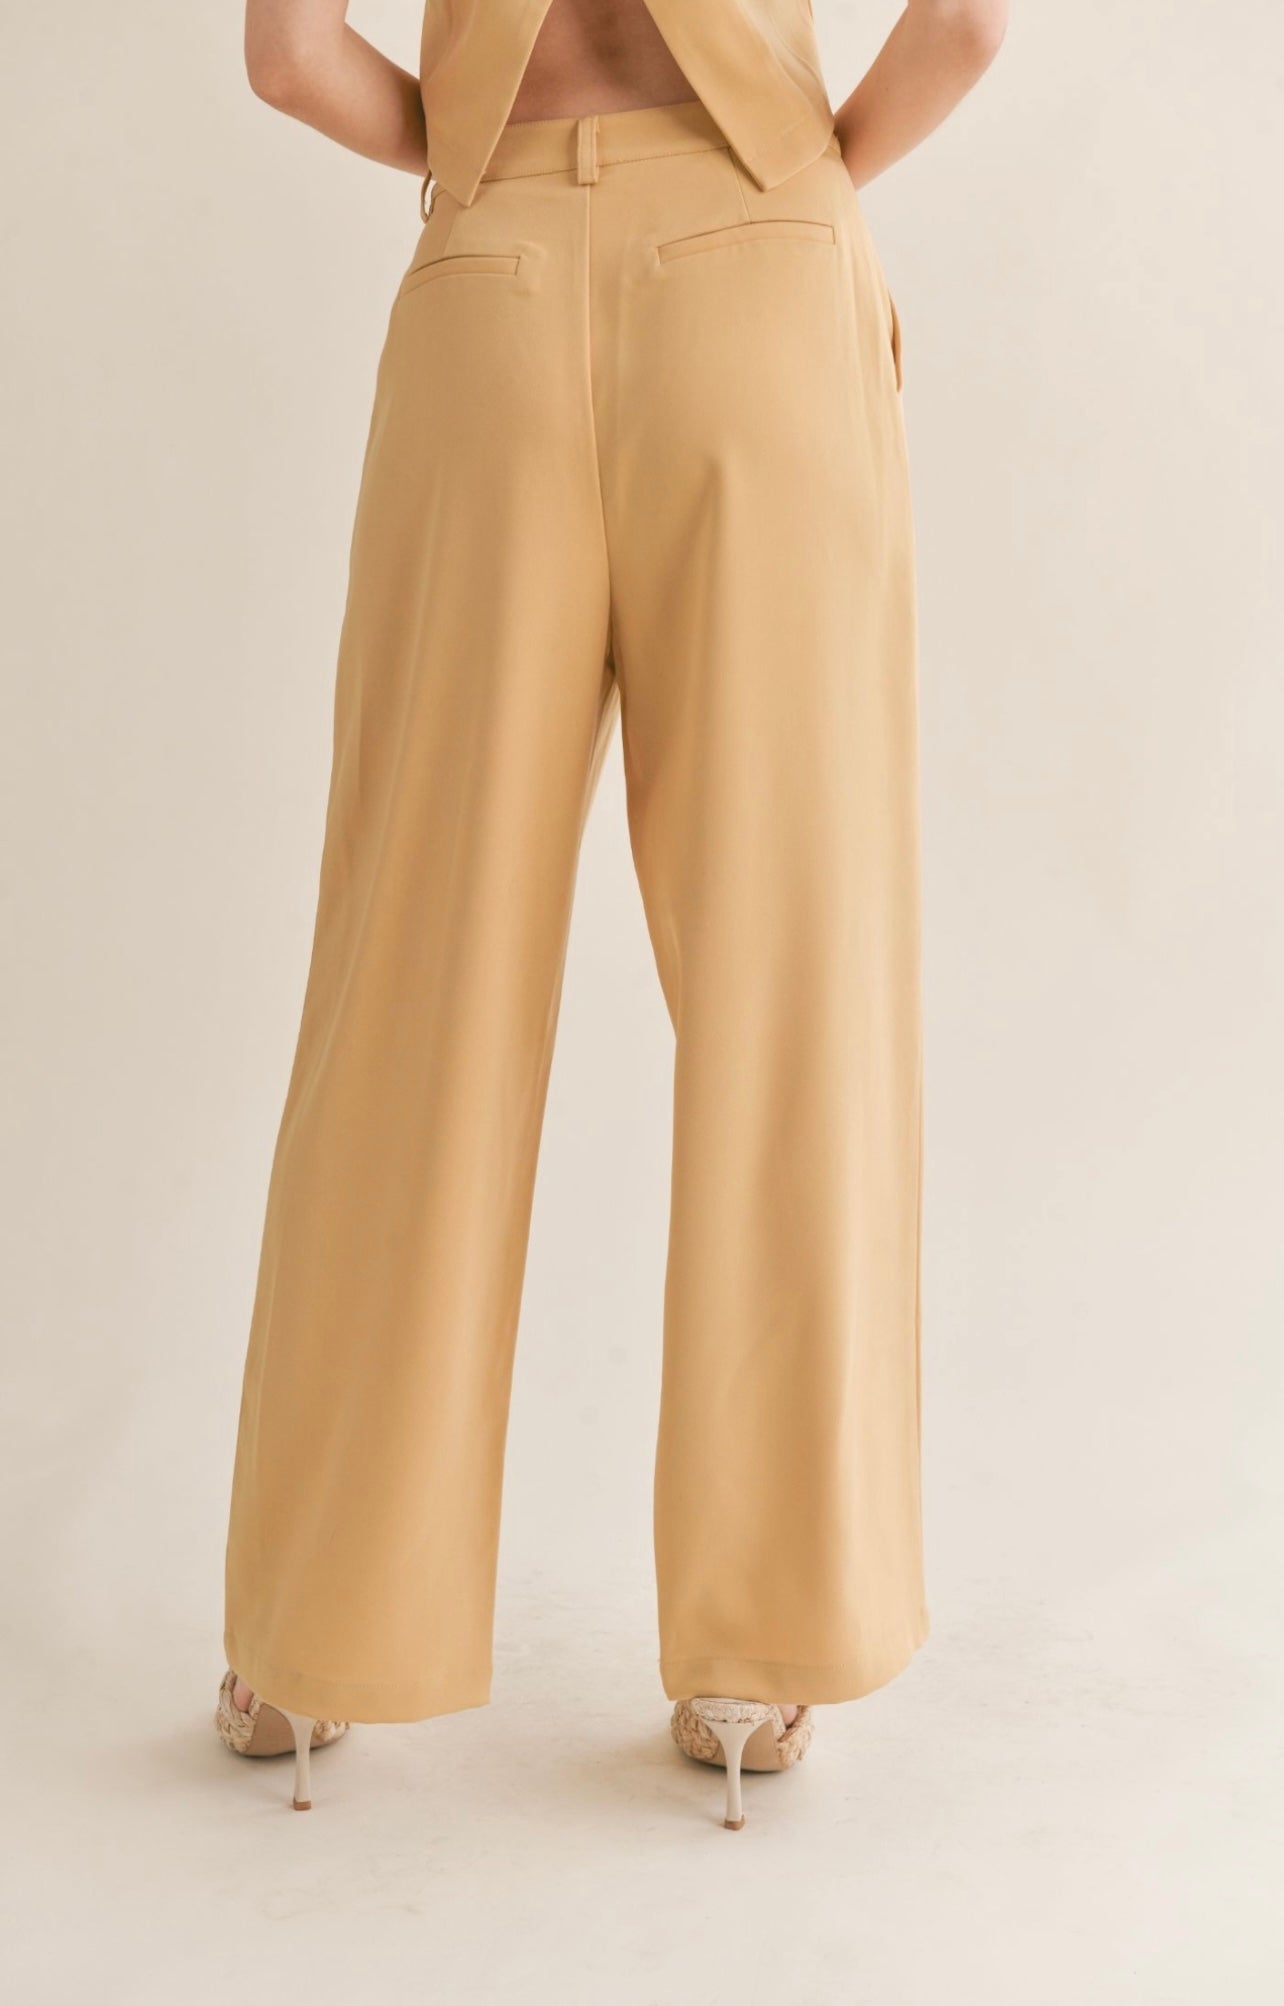 Sage the Label Follow Me Pleated Trousers - Marigold